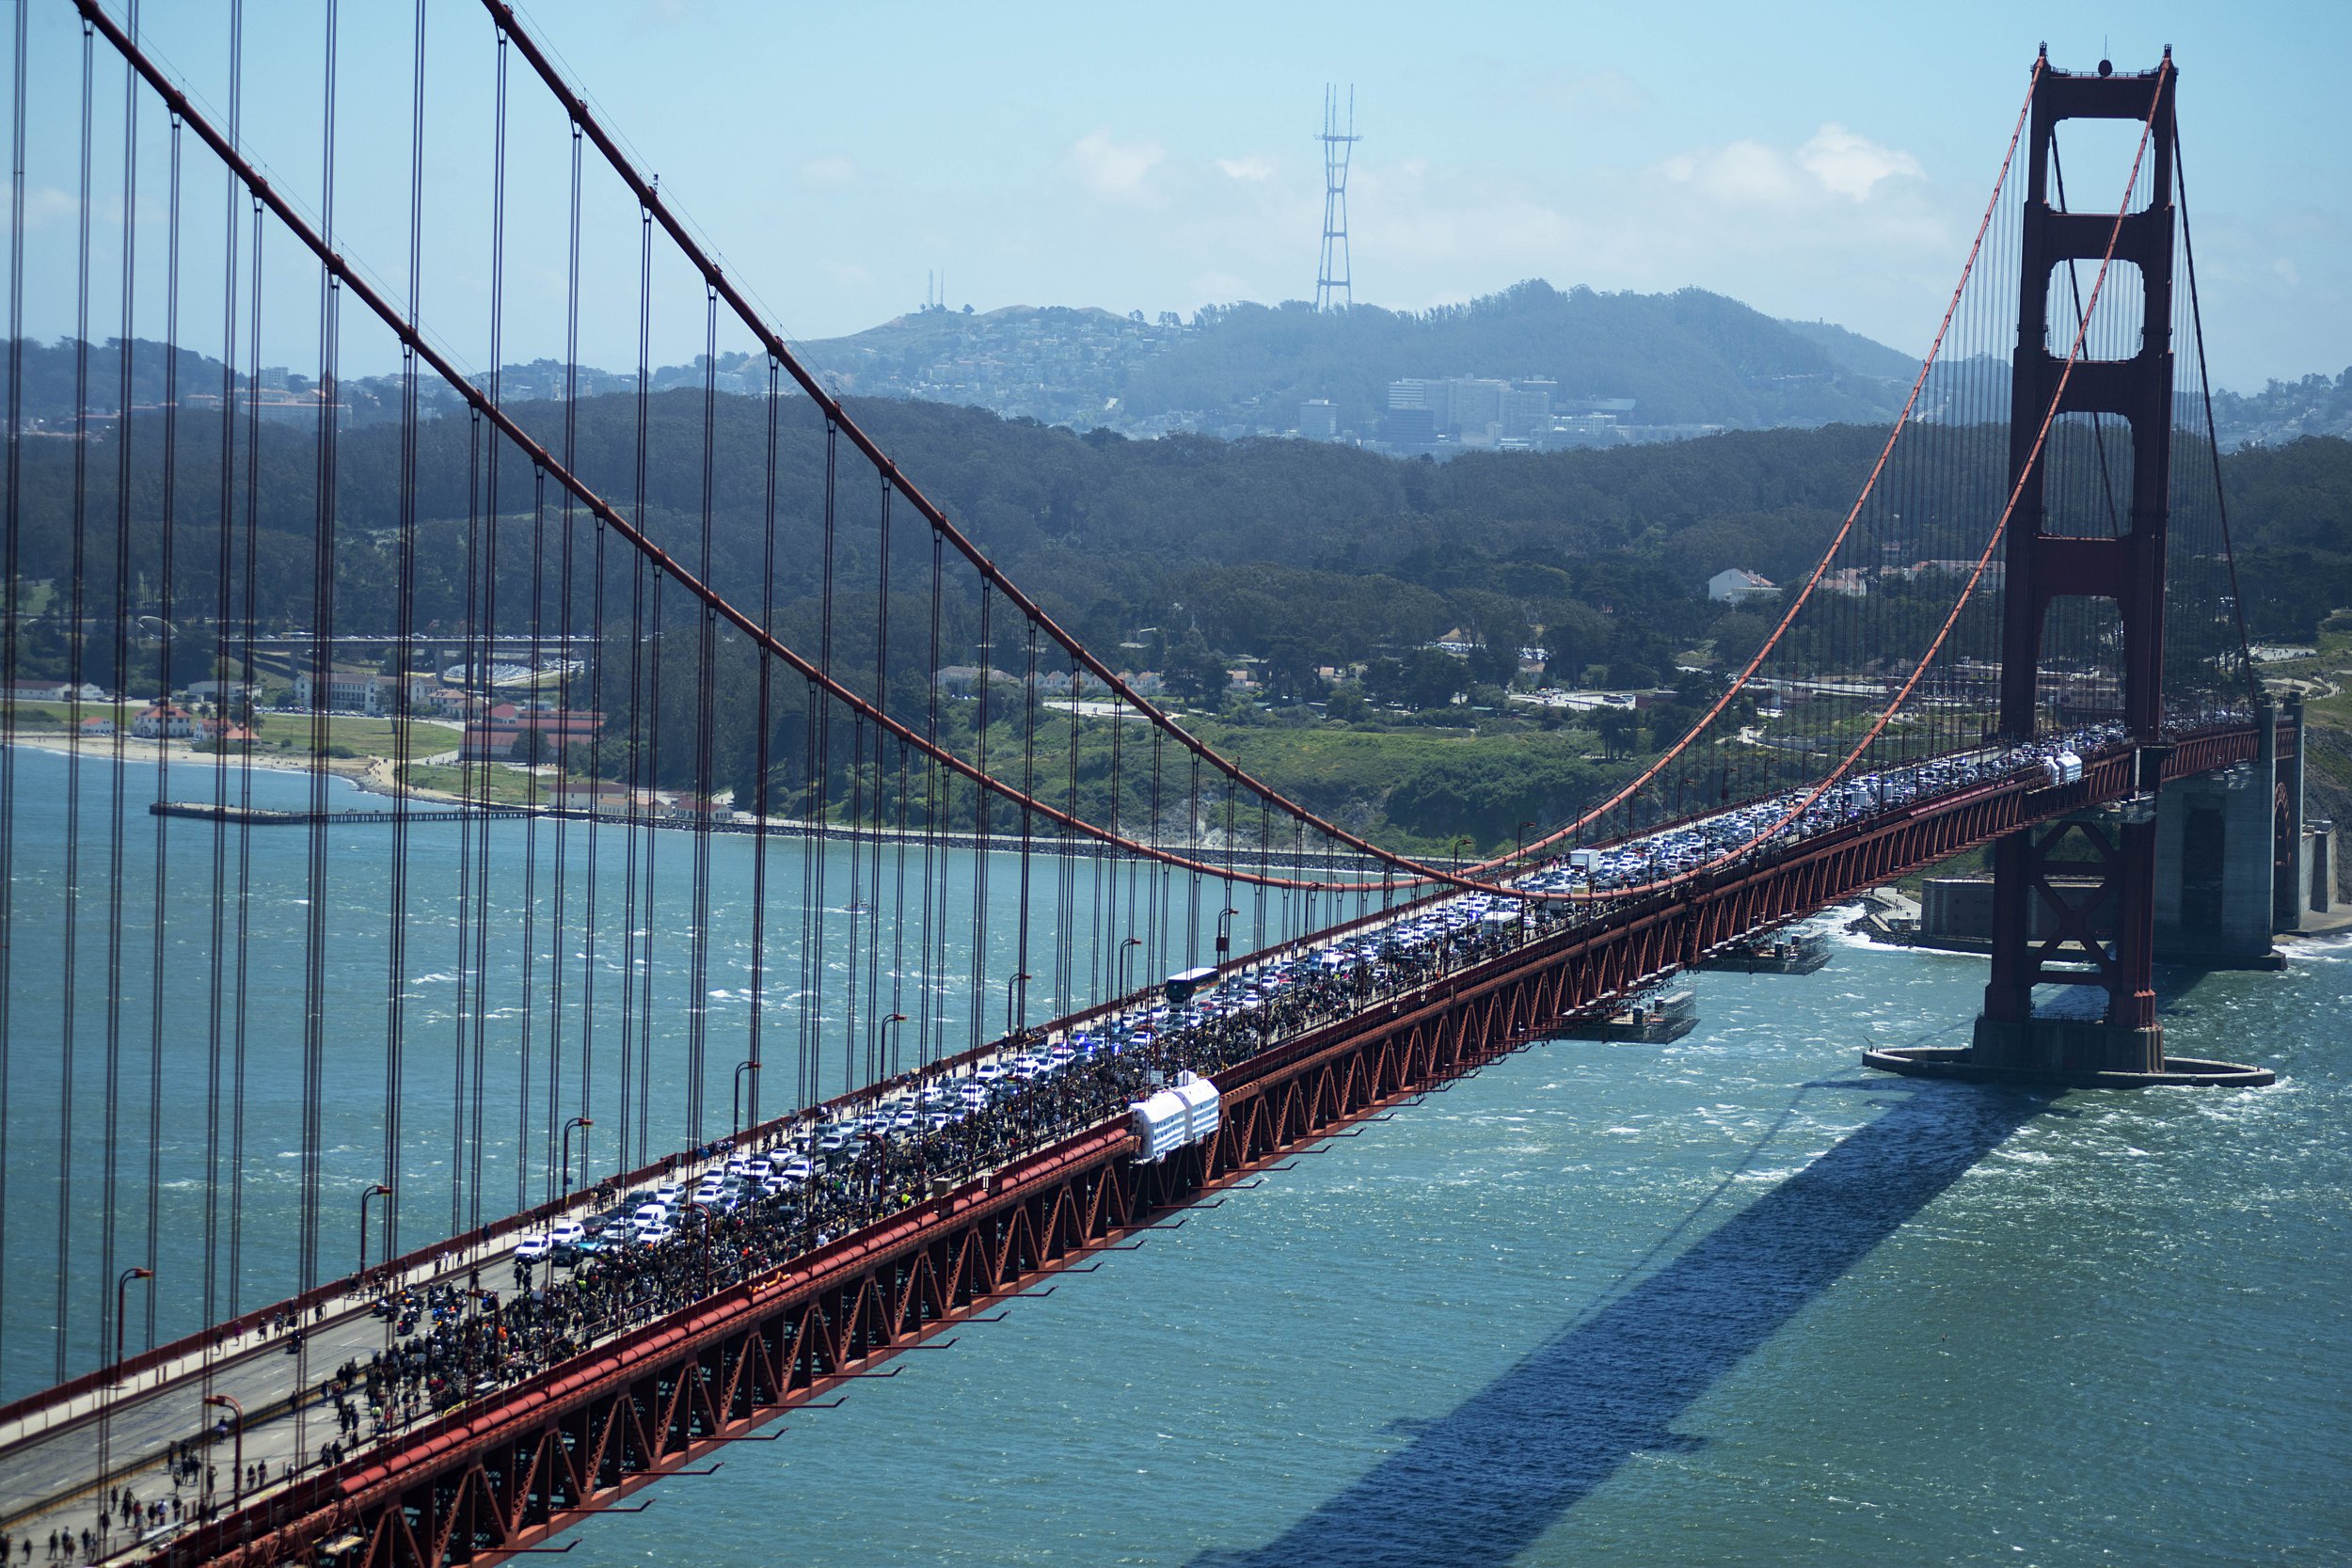  George Floyd and police brutality protestors shut down incoming traffic to San Francisco across the Golden Gate Bridge during a march on June 26, 2020.  